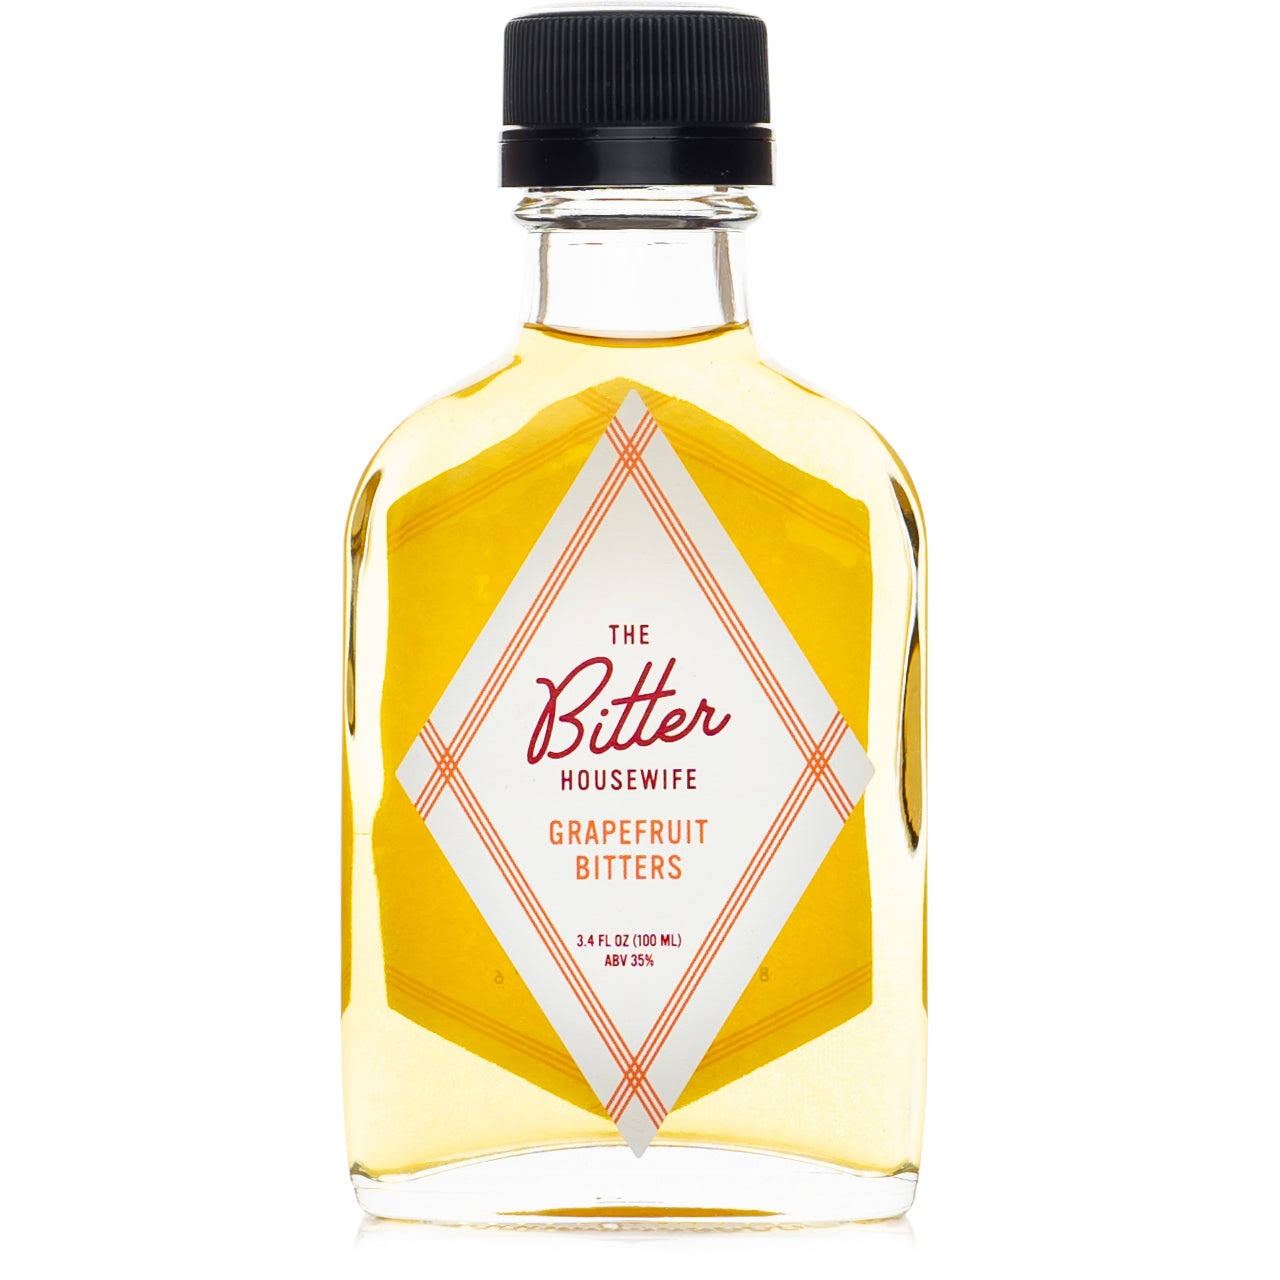 The Bitter Housewife Bitters Grapefruit Bitters